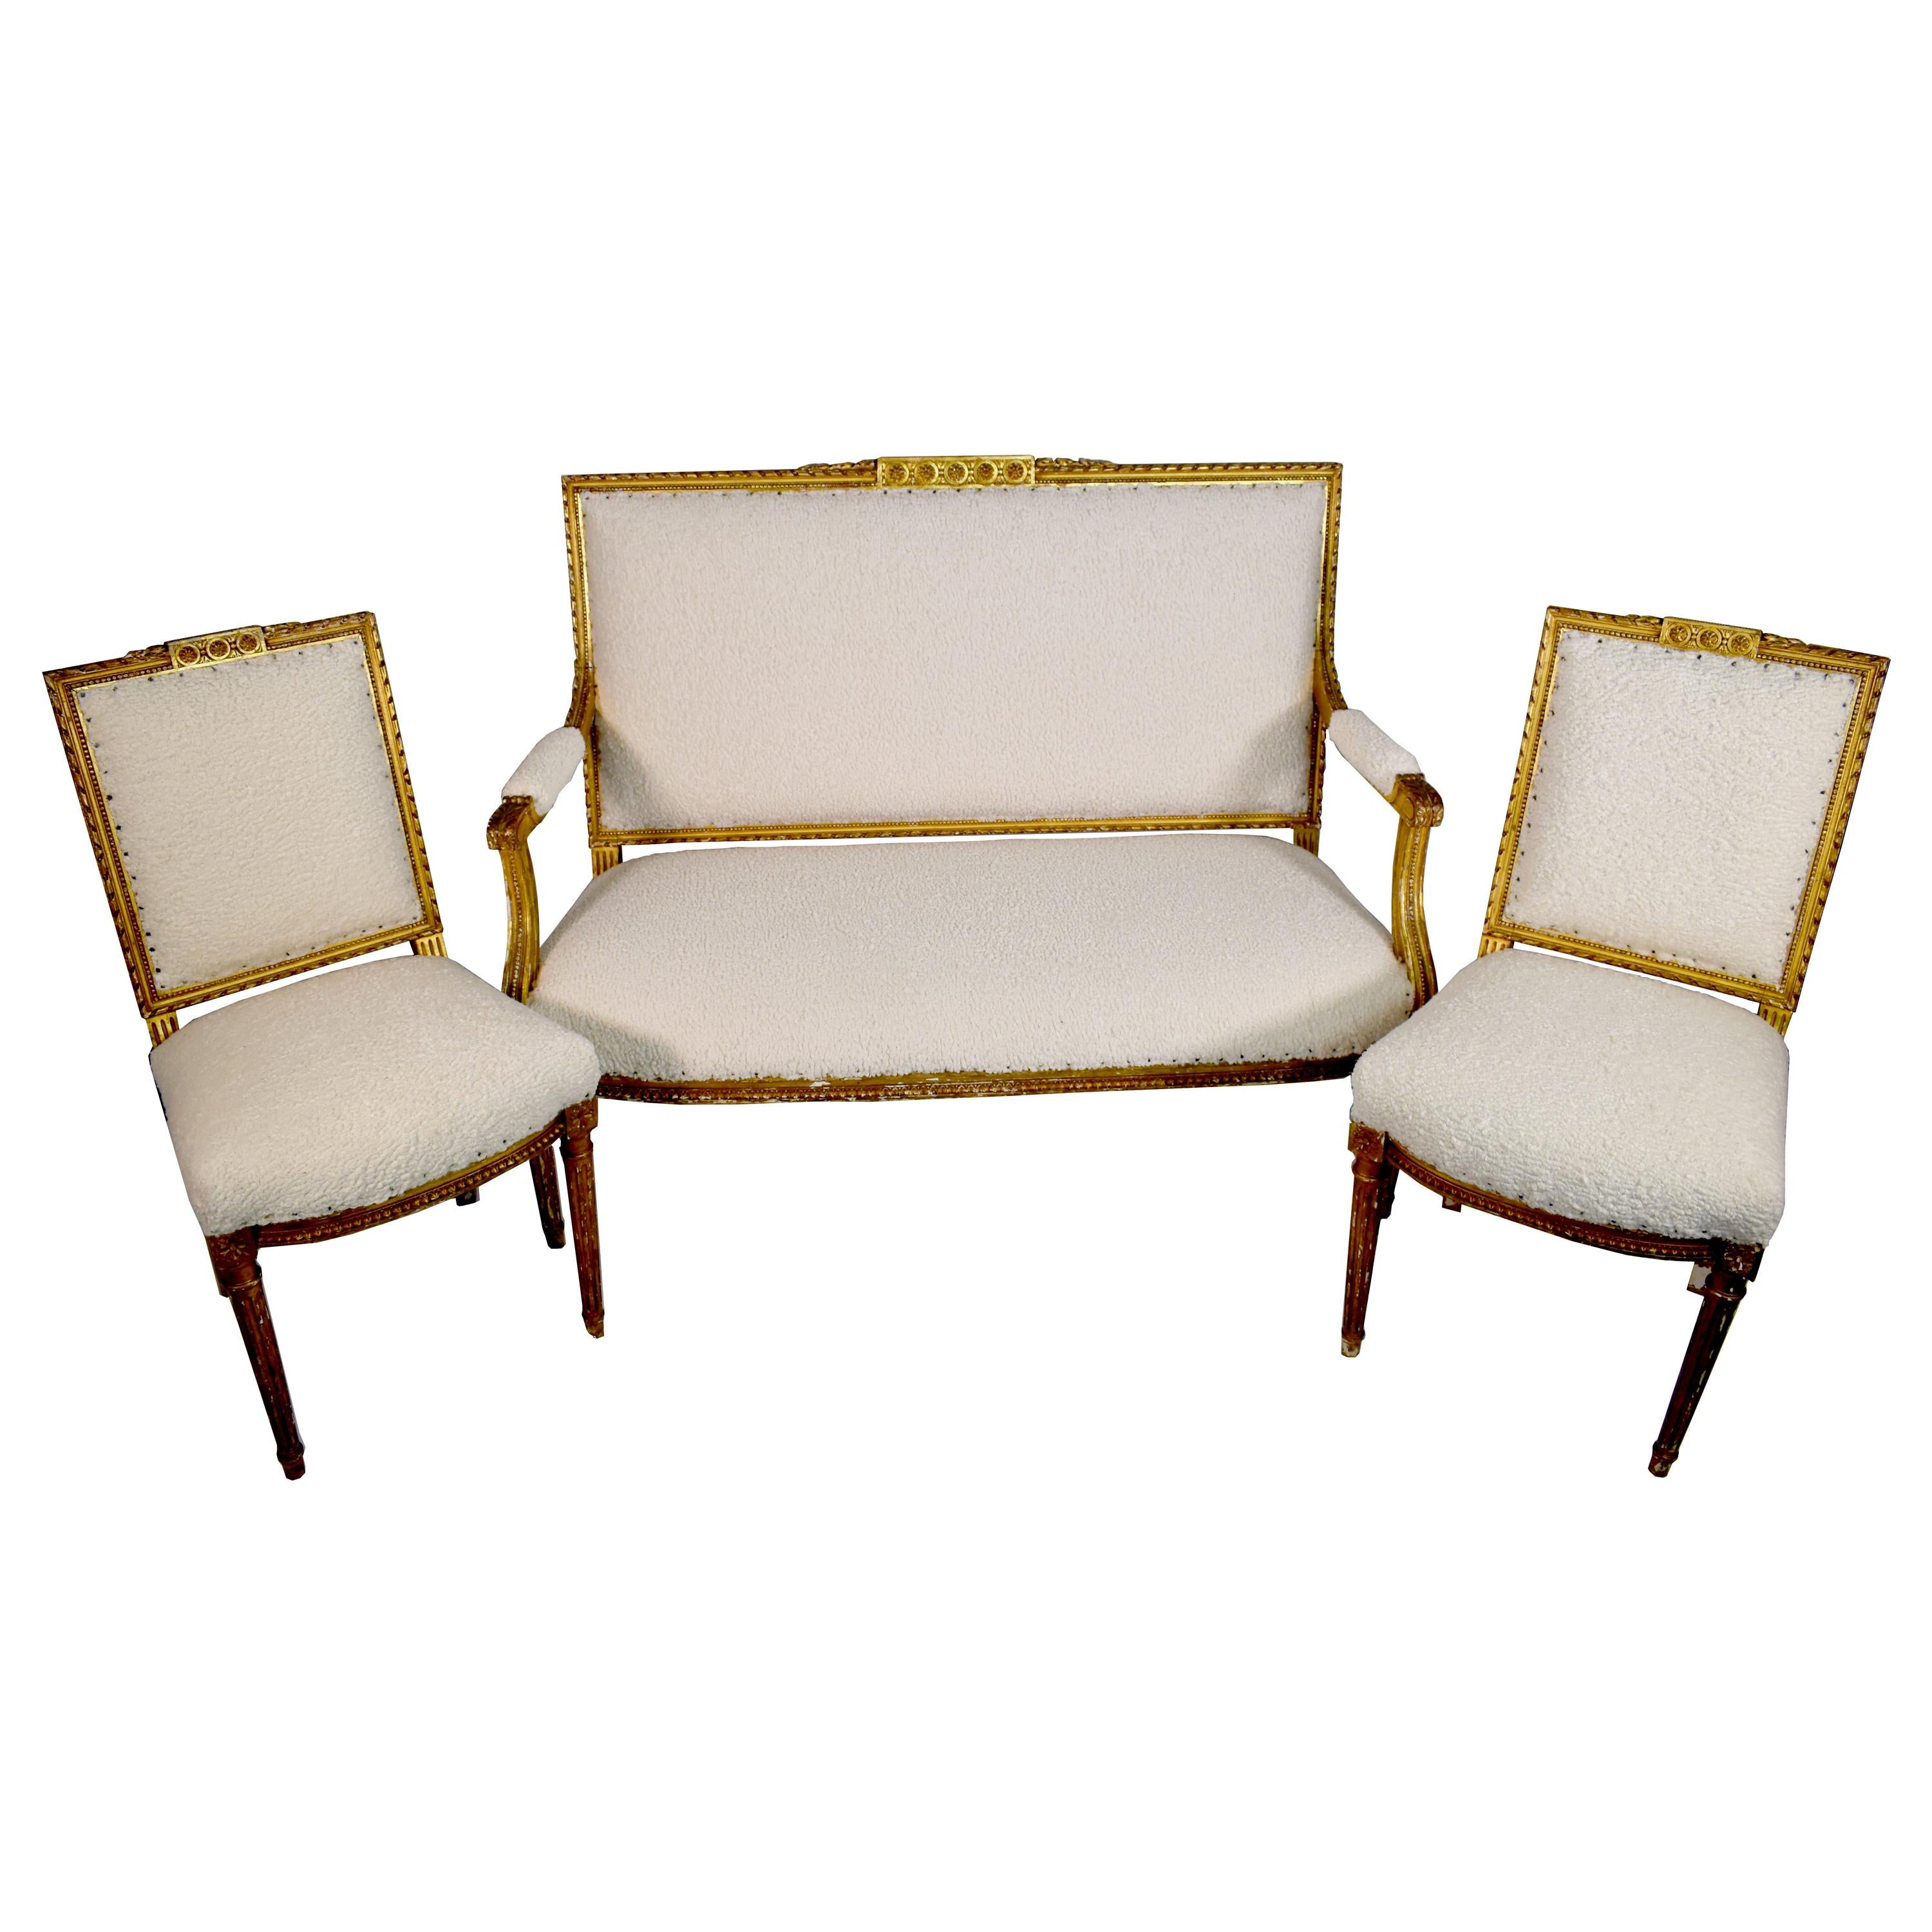 French Giltwood Settee and Two Chairs, 19th Century